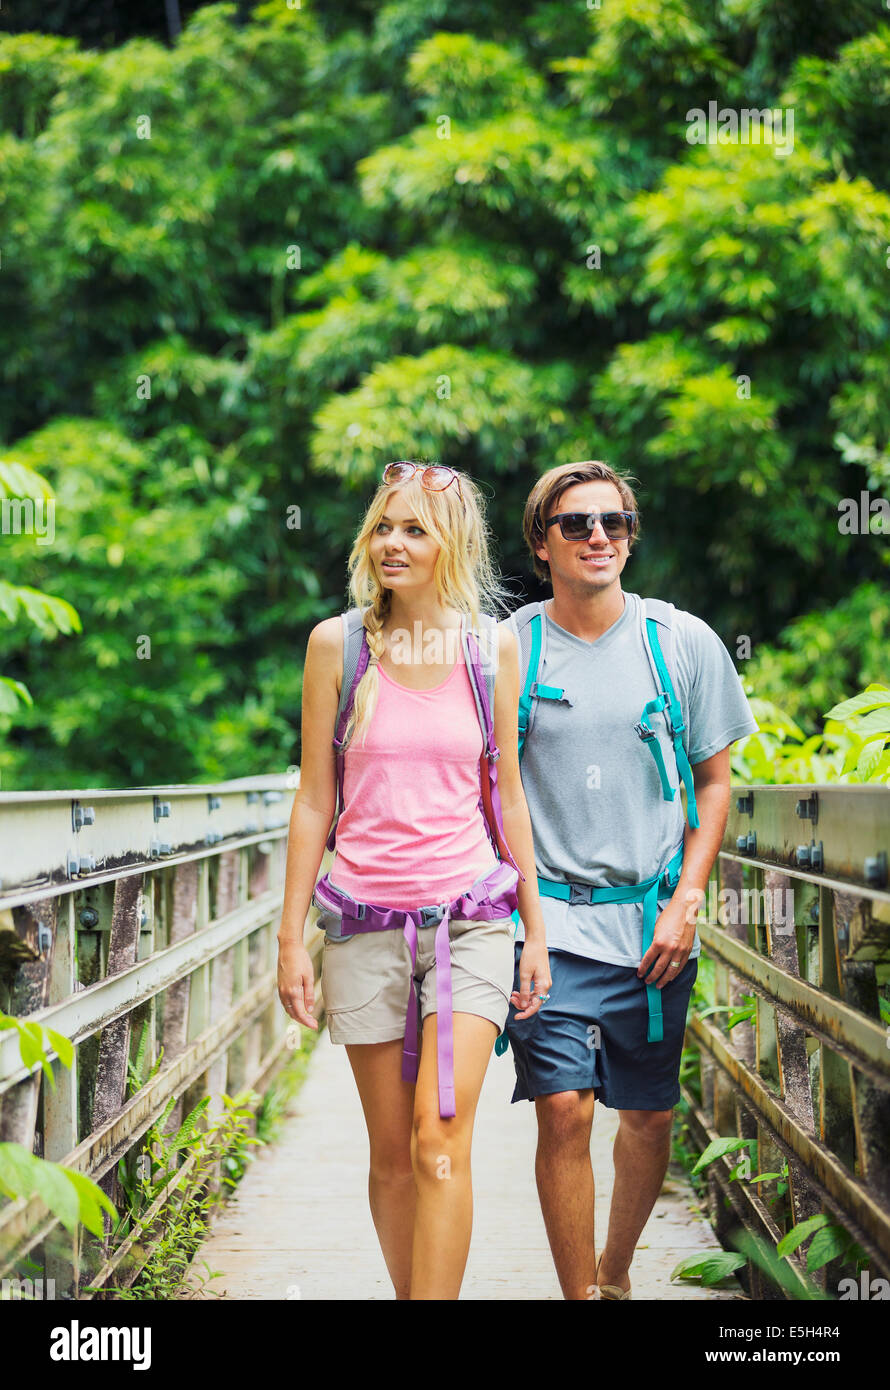 Attractive young couple having fun together outdoors on hike Stock Photo